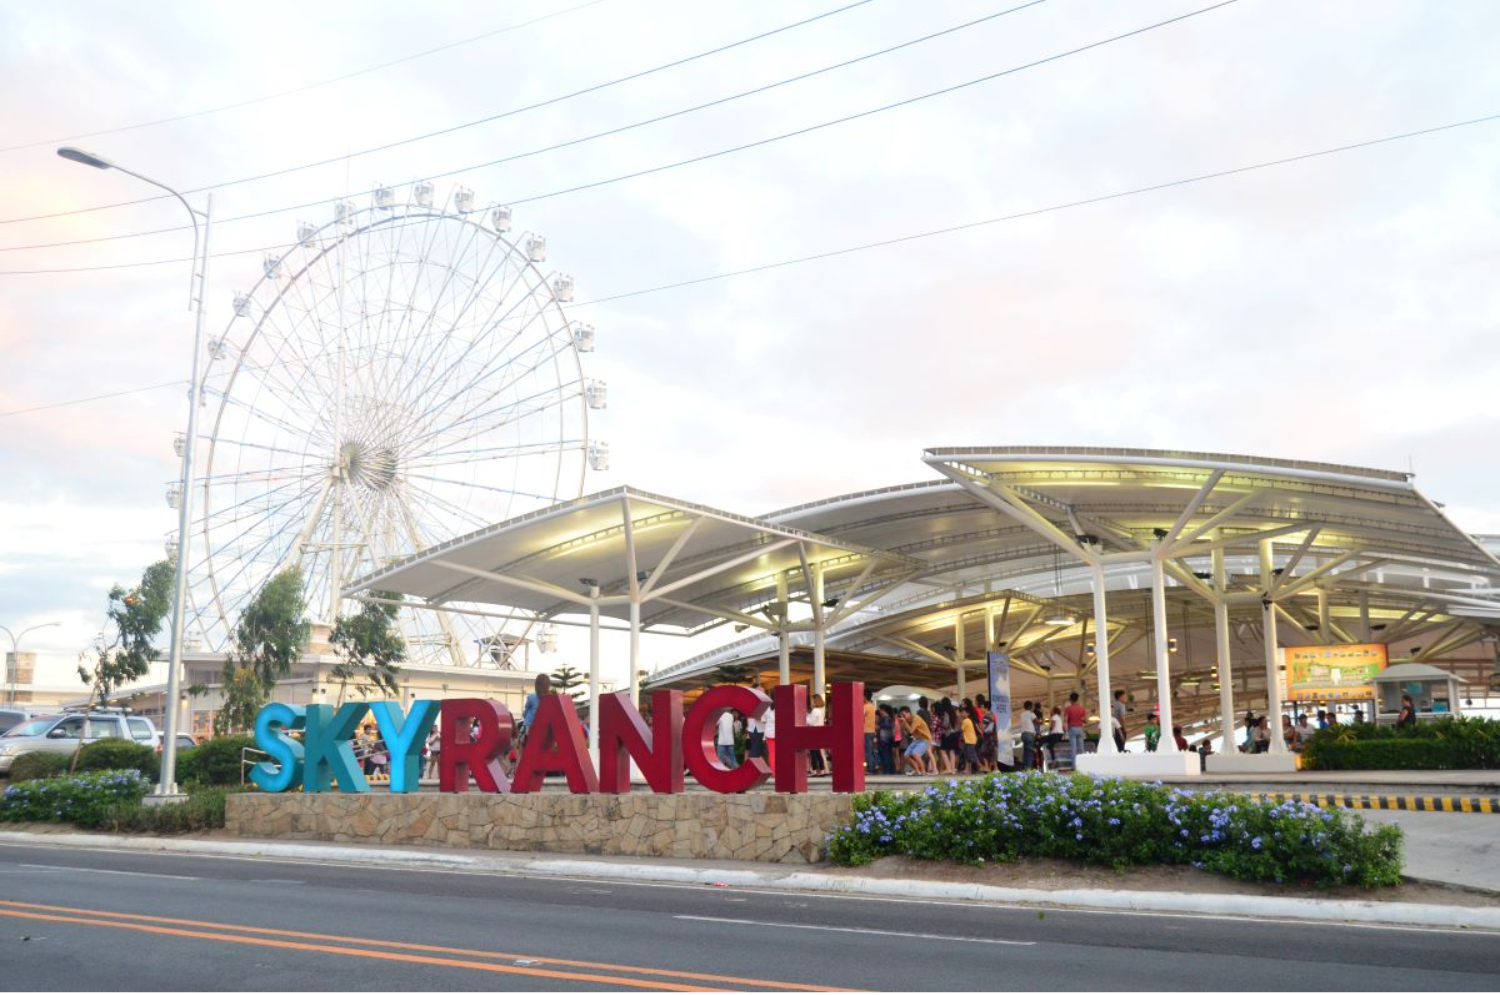 Chill Thrills and Christmas Feels only here at Sky Ranch Tagaytay